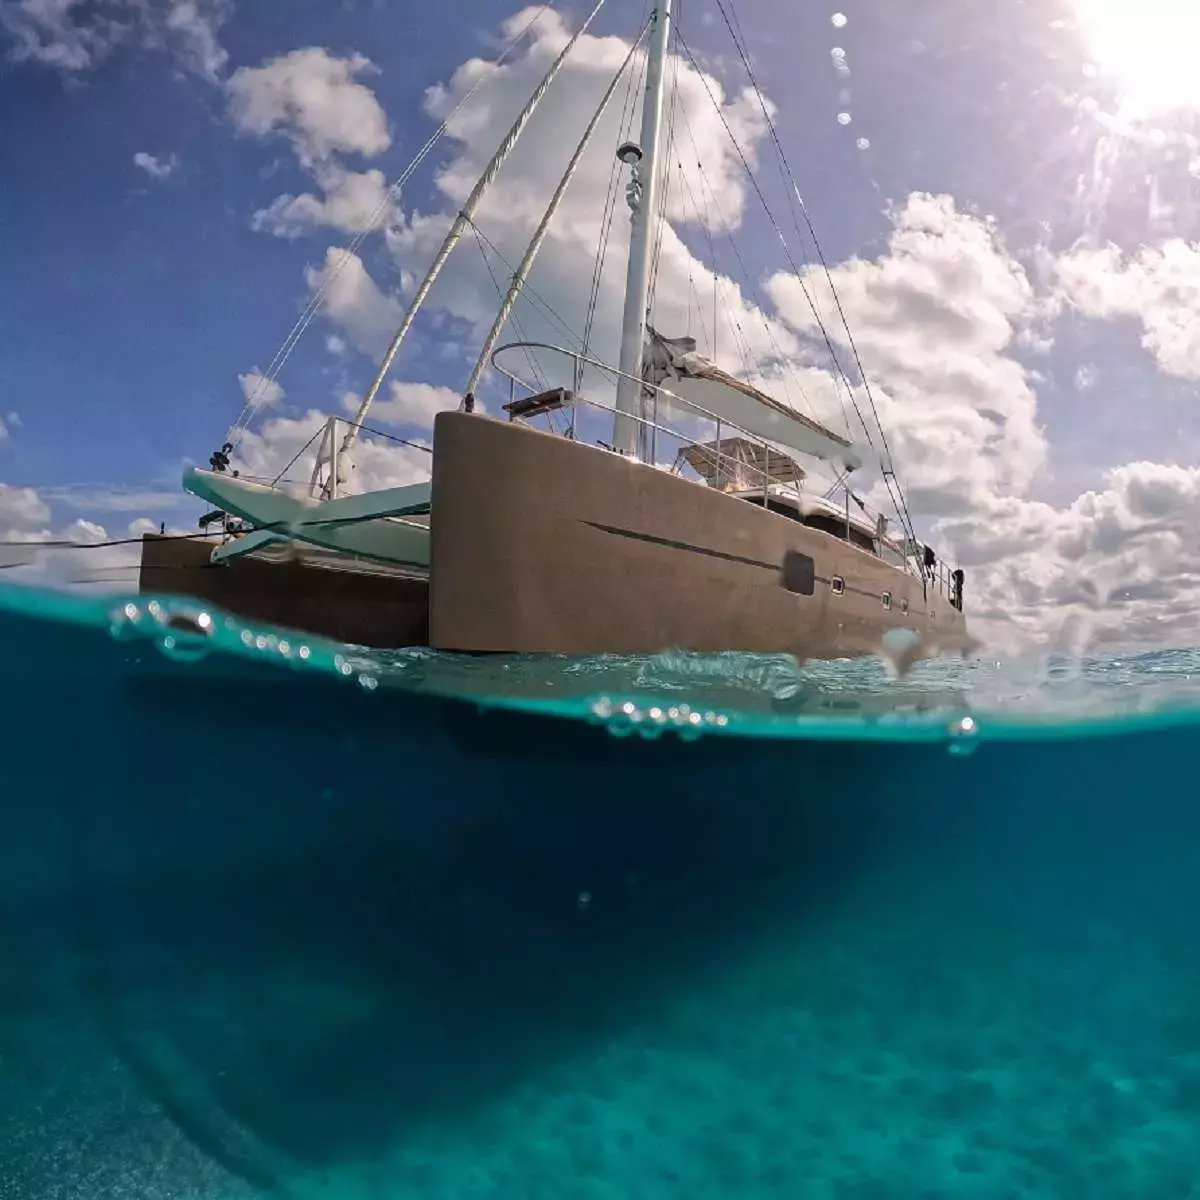 Serendipity by Sunreef Yachts - Special Offer for a private Sailing Catamaran Charter in Exuma with a crew